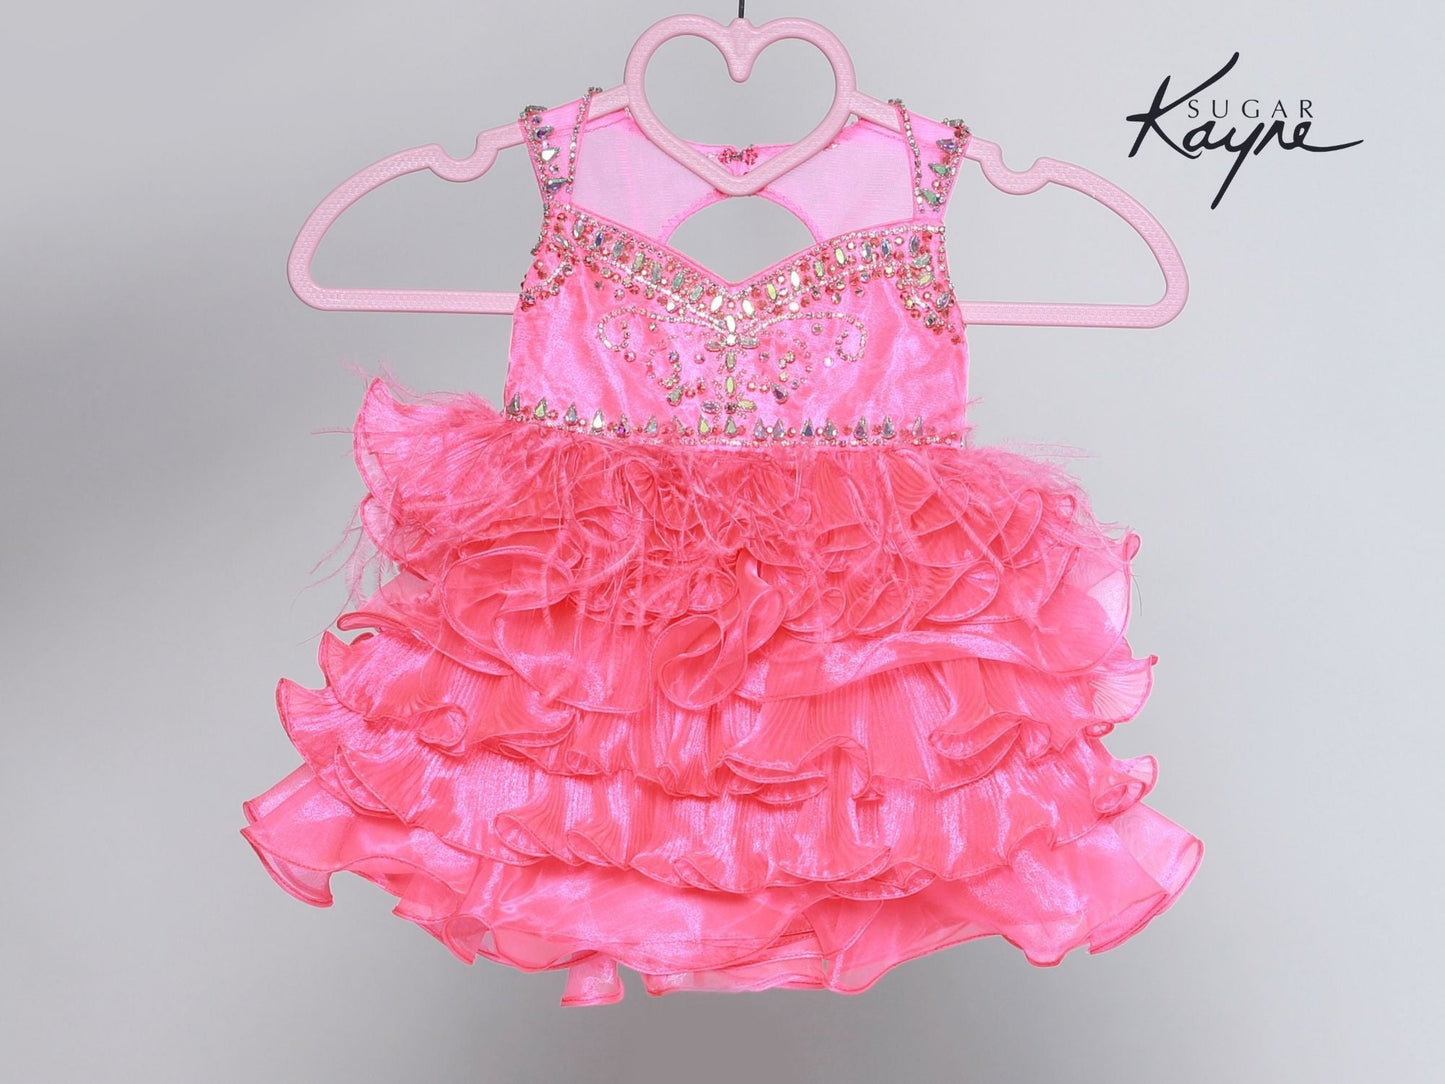 Sugar Kayne C202 Girls Pleated Ruffle Feather Cupcake Pageant Dress Toddle Baby Gown Crystal embellished keyhole cutout back  Sizes: 0M, 6M, 12M, 18M, 24M, 2T, 3T, 4T, 5T, 6T  Colors: Neon Pink, Royal, White